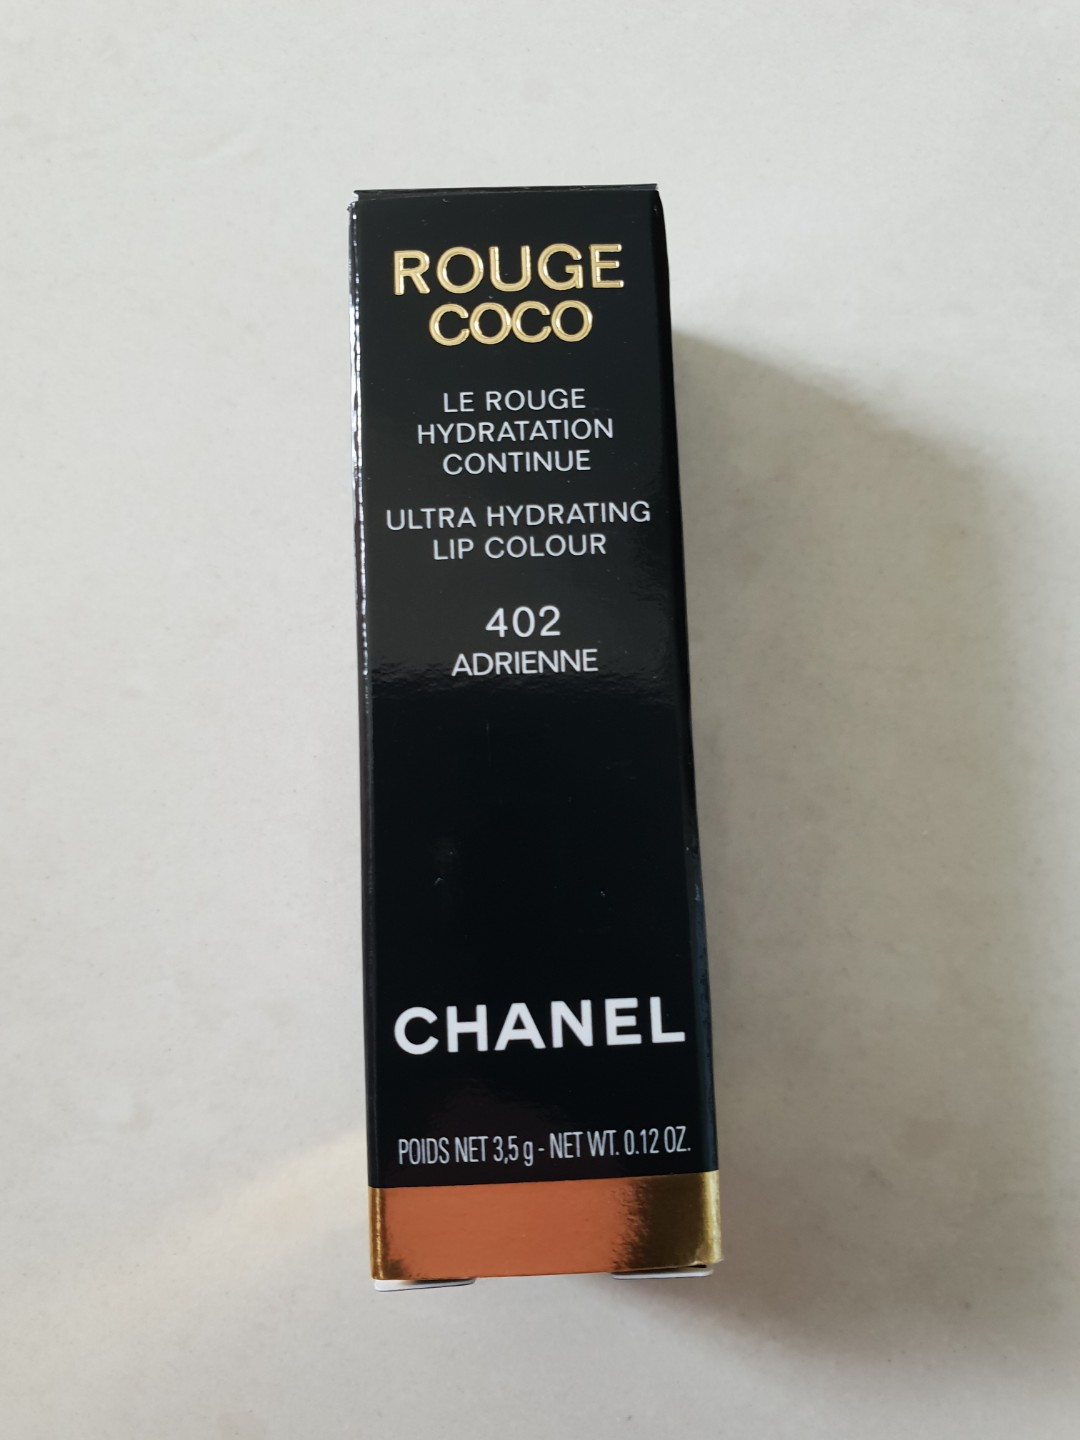 Rouge Coco Ultra Hydrating Lip Colour - 402 Adrienne by Chanel for Women -  0.12 oz Lipstick